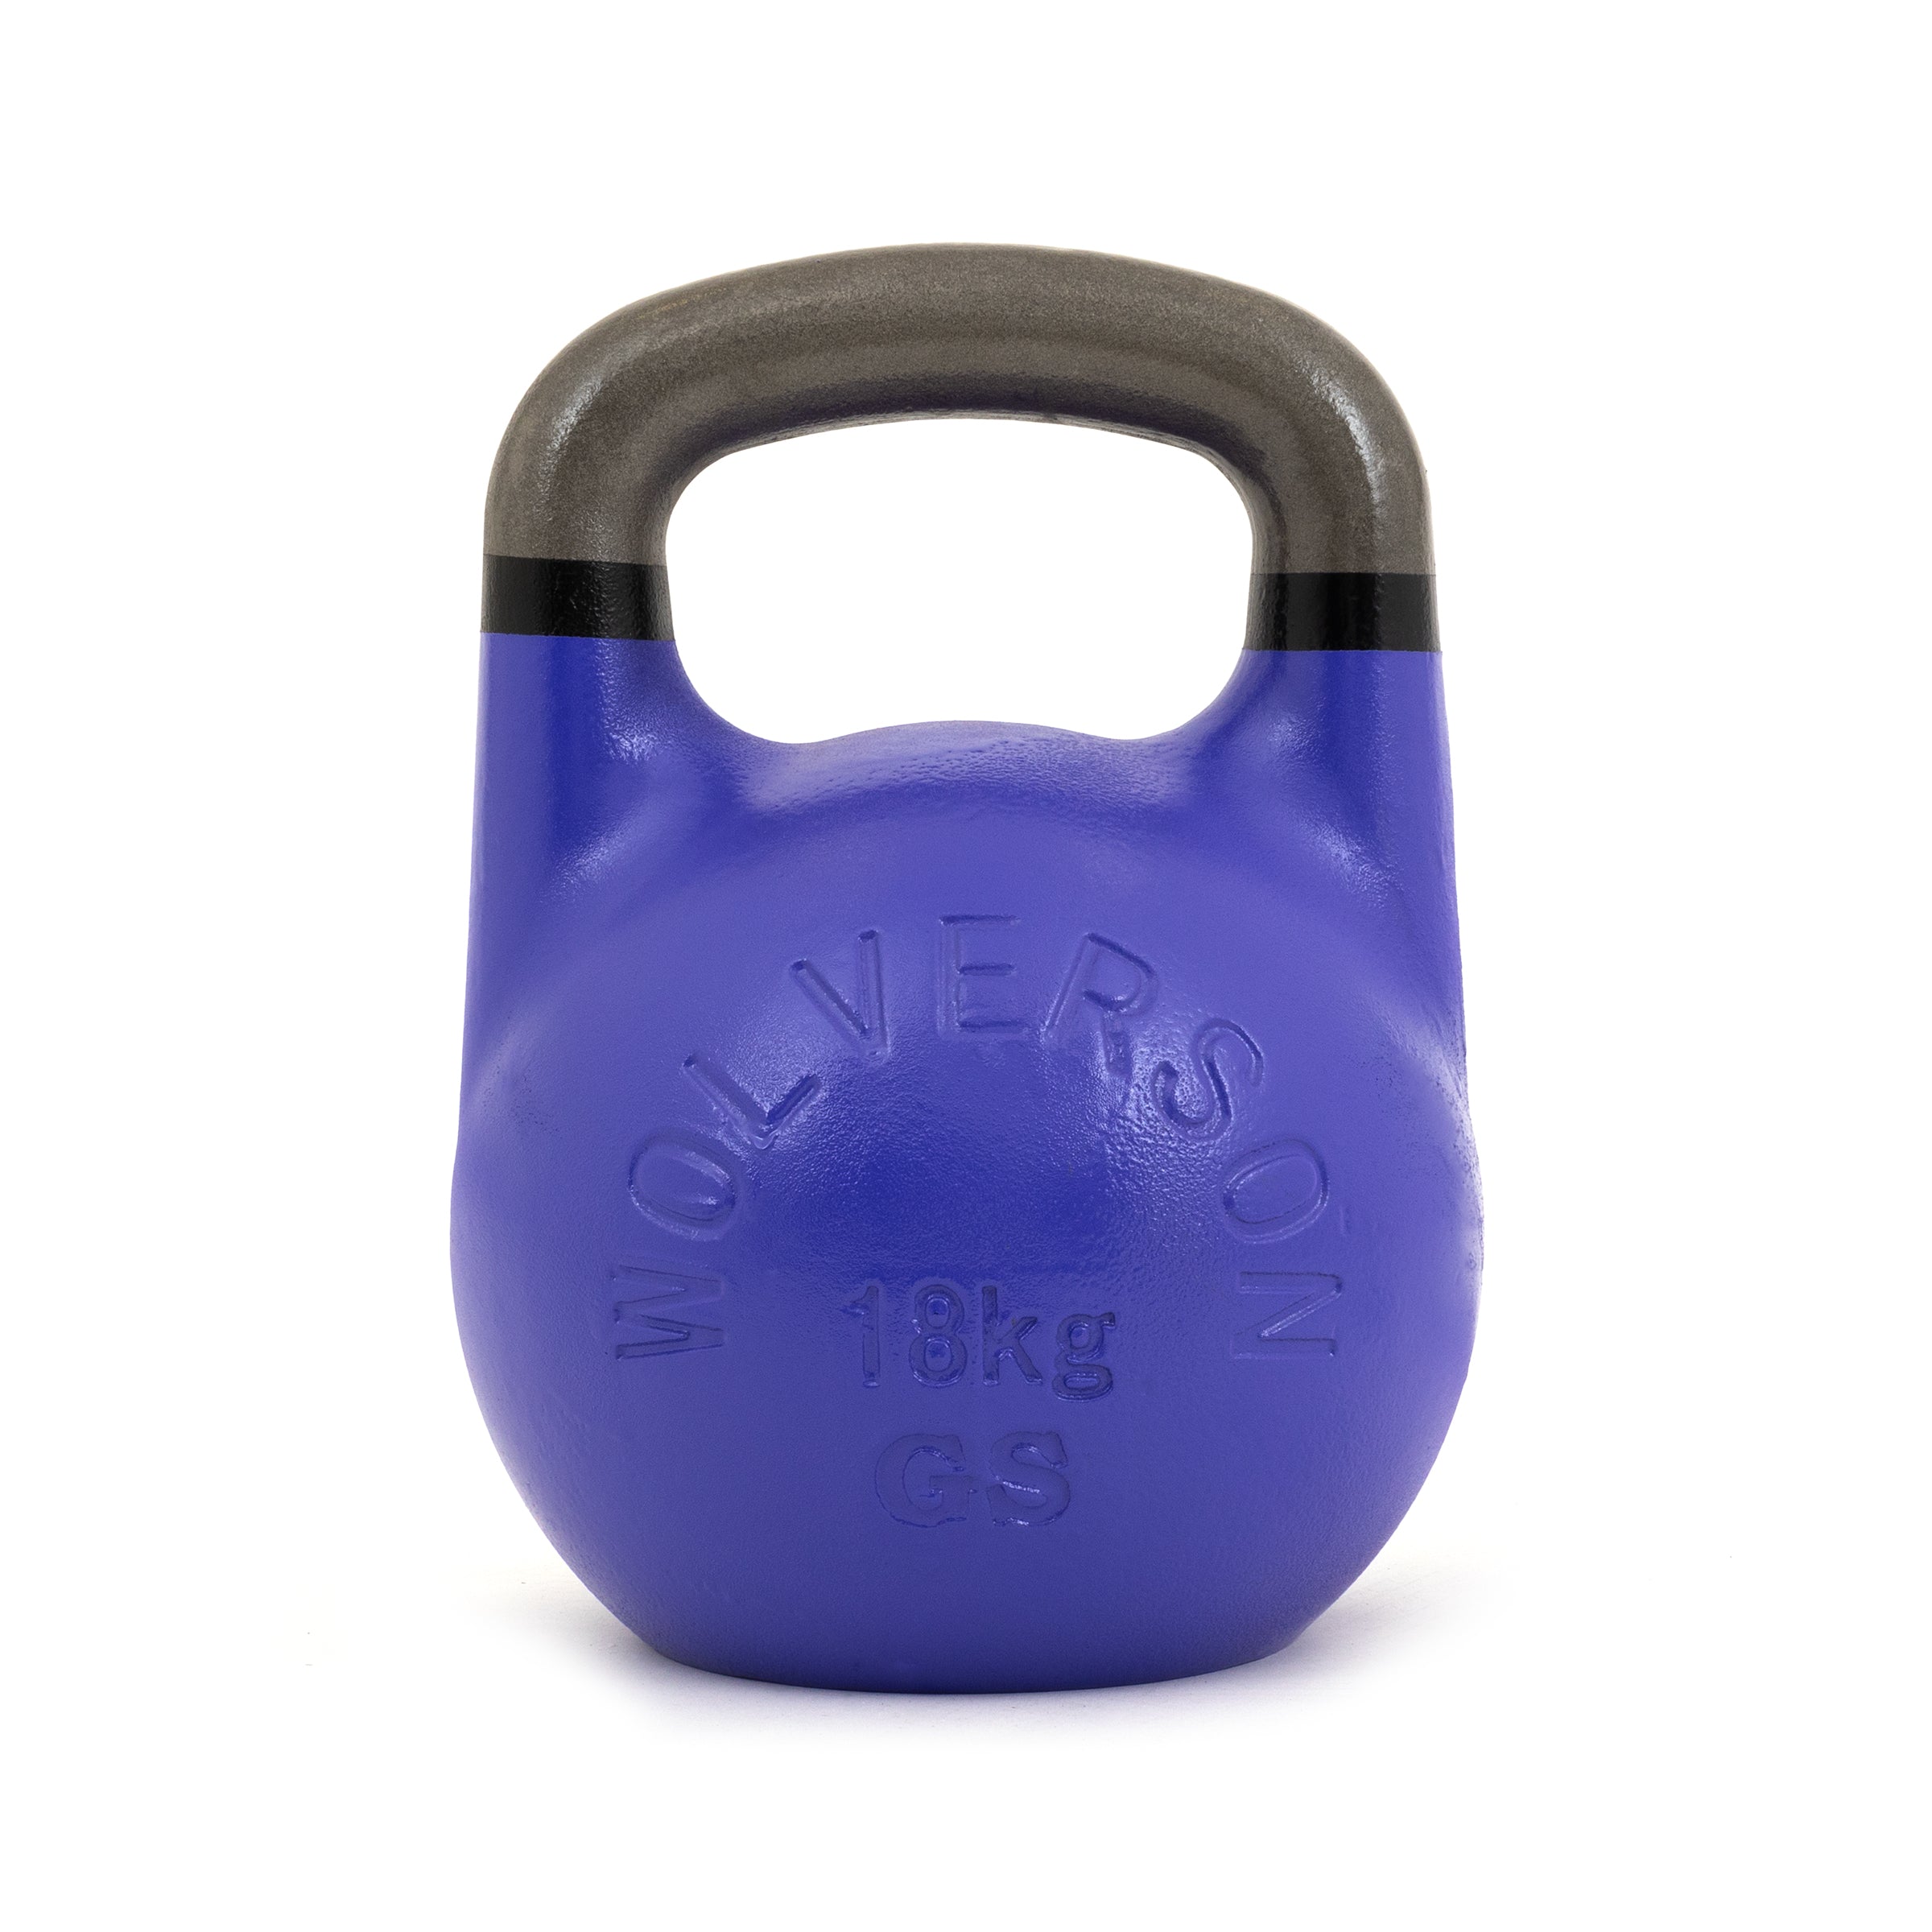 Wolverson GS Competition Kettlebells